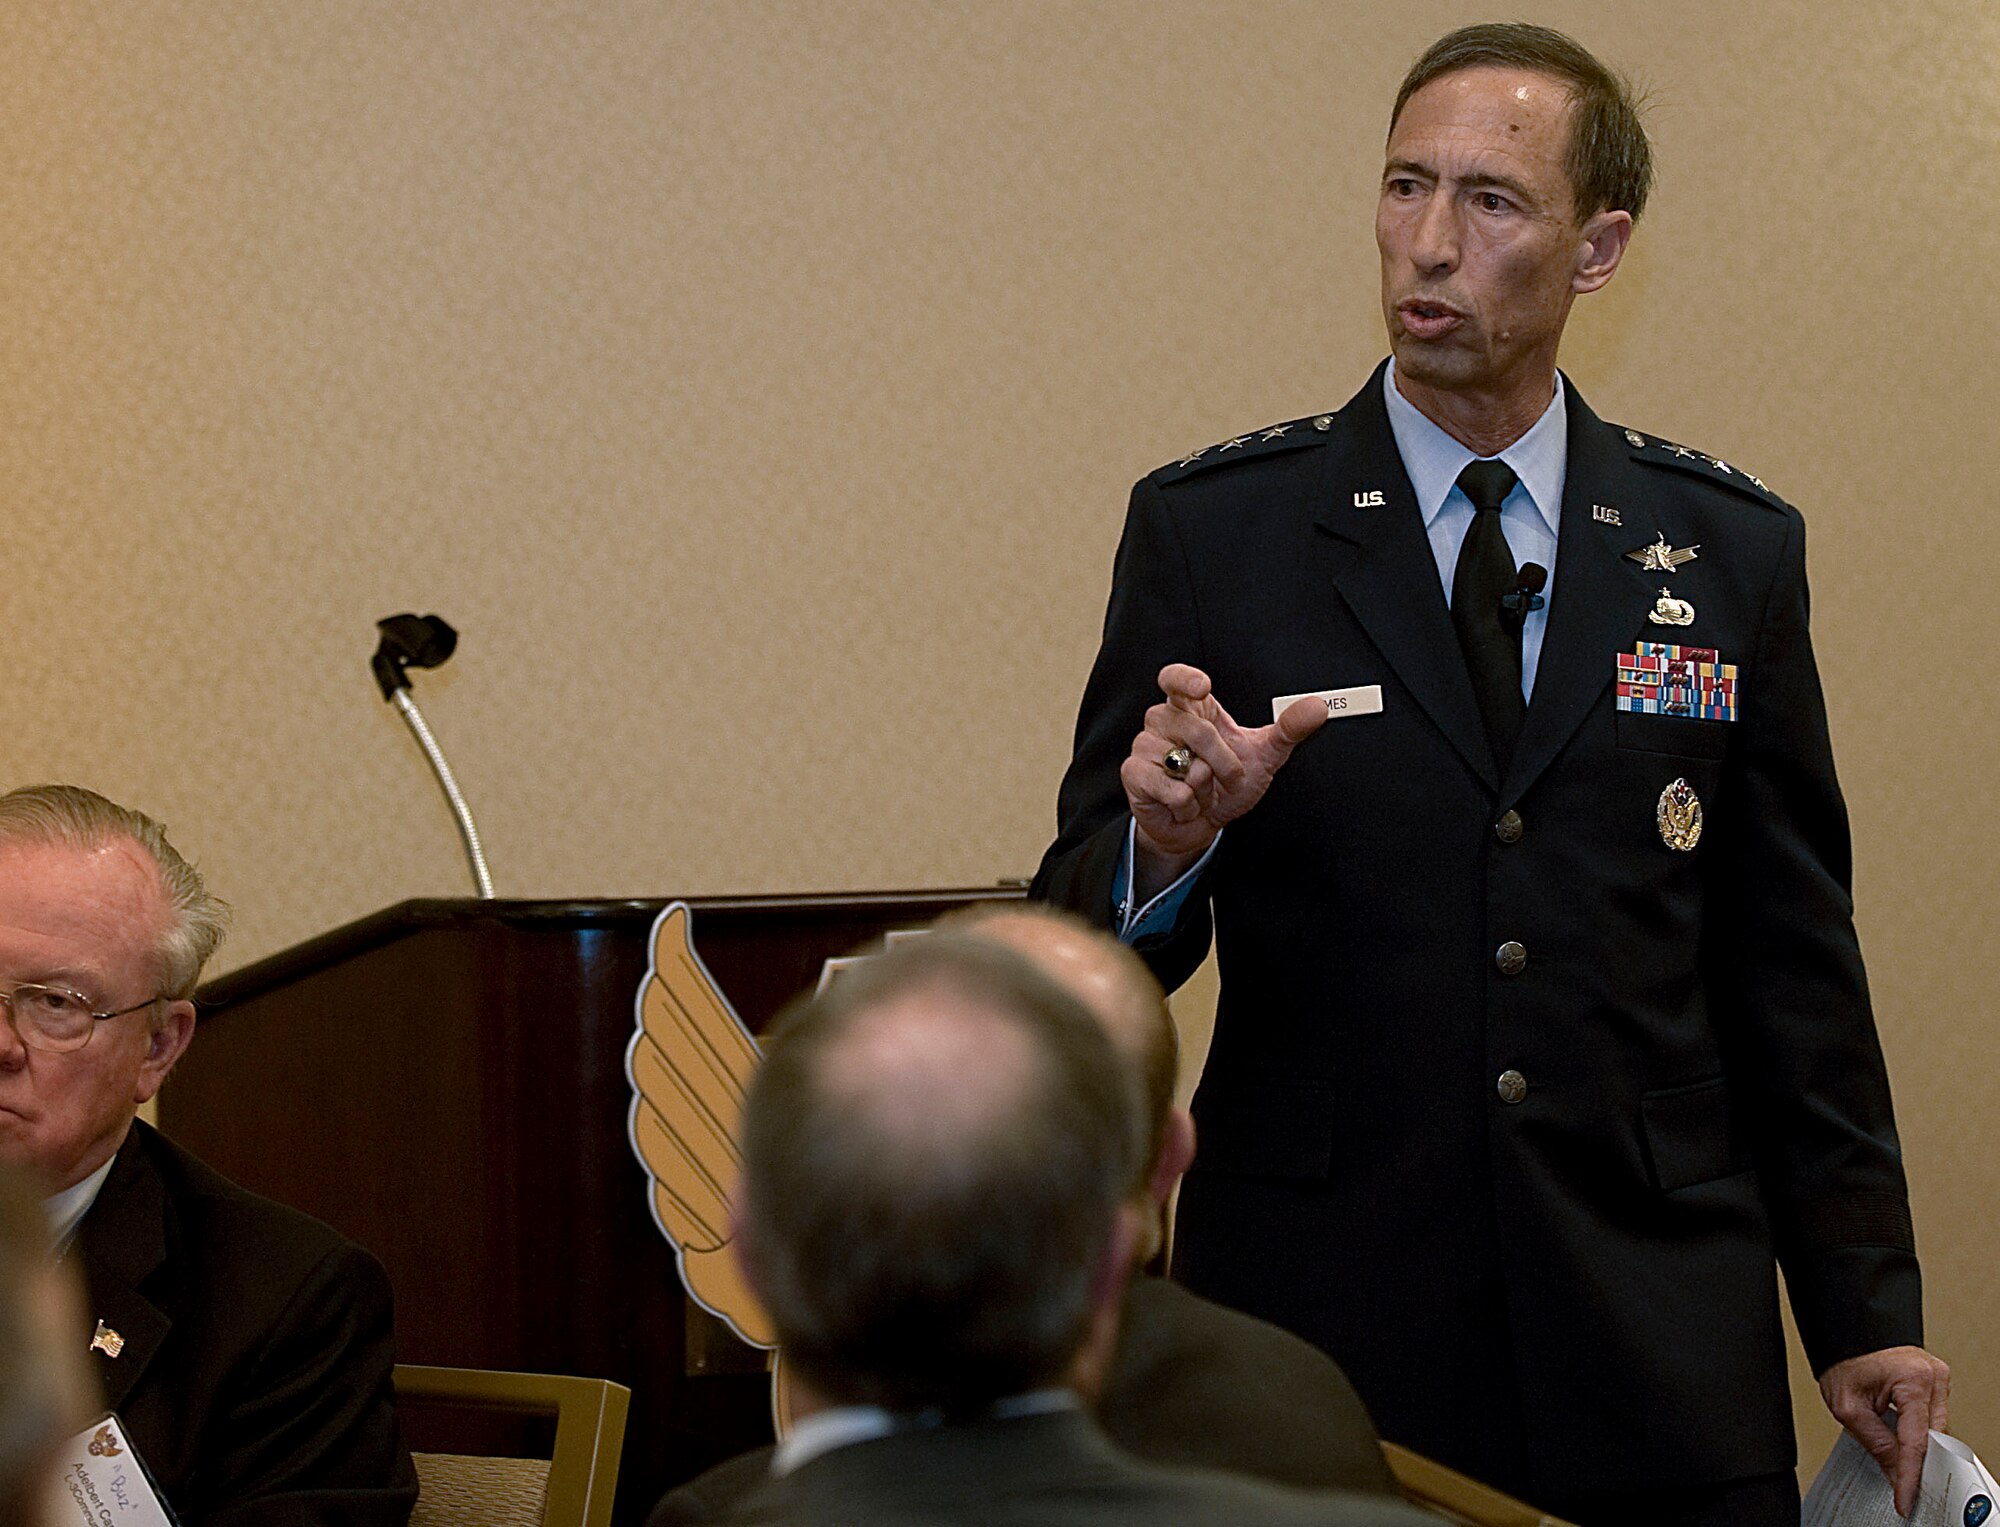 Lt. Gen. Larry D. James spoke about how intelligence, surveillance and reconnaissance is done today and where it’s headed in the future April 26, 2012, during the Air Force Association breakfast at the Crystal City Marriott, Va. More than 20,000 Airmen work in ISR missions on a daily basis. Of that number, more than 1,000 are deployed across all combatant command areas executing joint-service missions. James is the deputy chief of staff for ISR at Headquarters Air Force. (U.S. Air Force photo/Staff Sgt. Tiffany Trojca) 